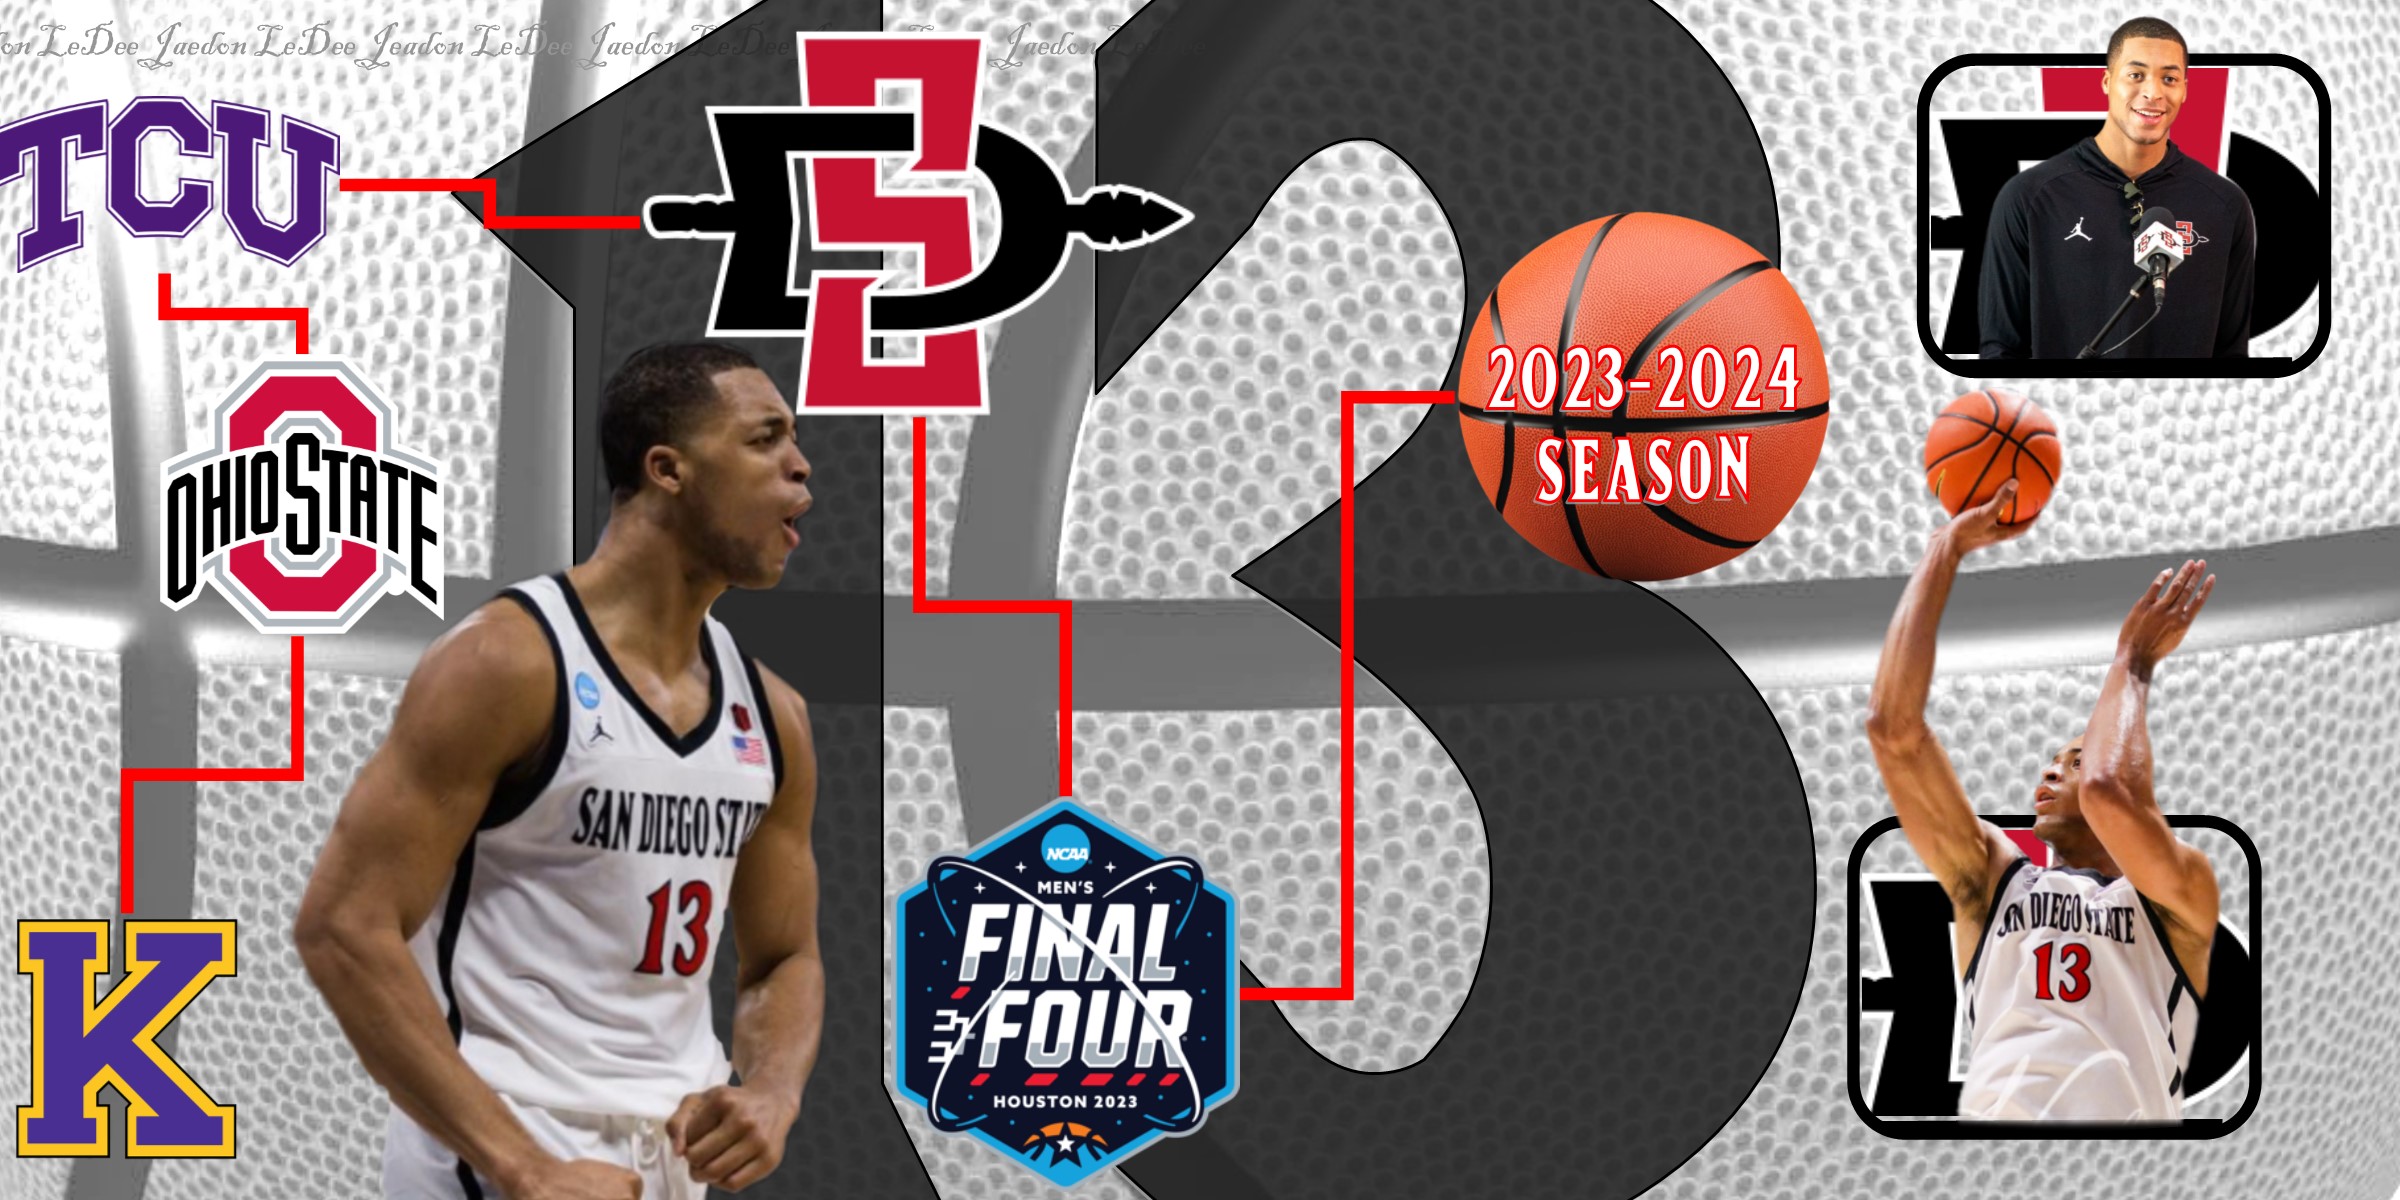 Turning points in San Diego State's season pointed Aztecs to Swe